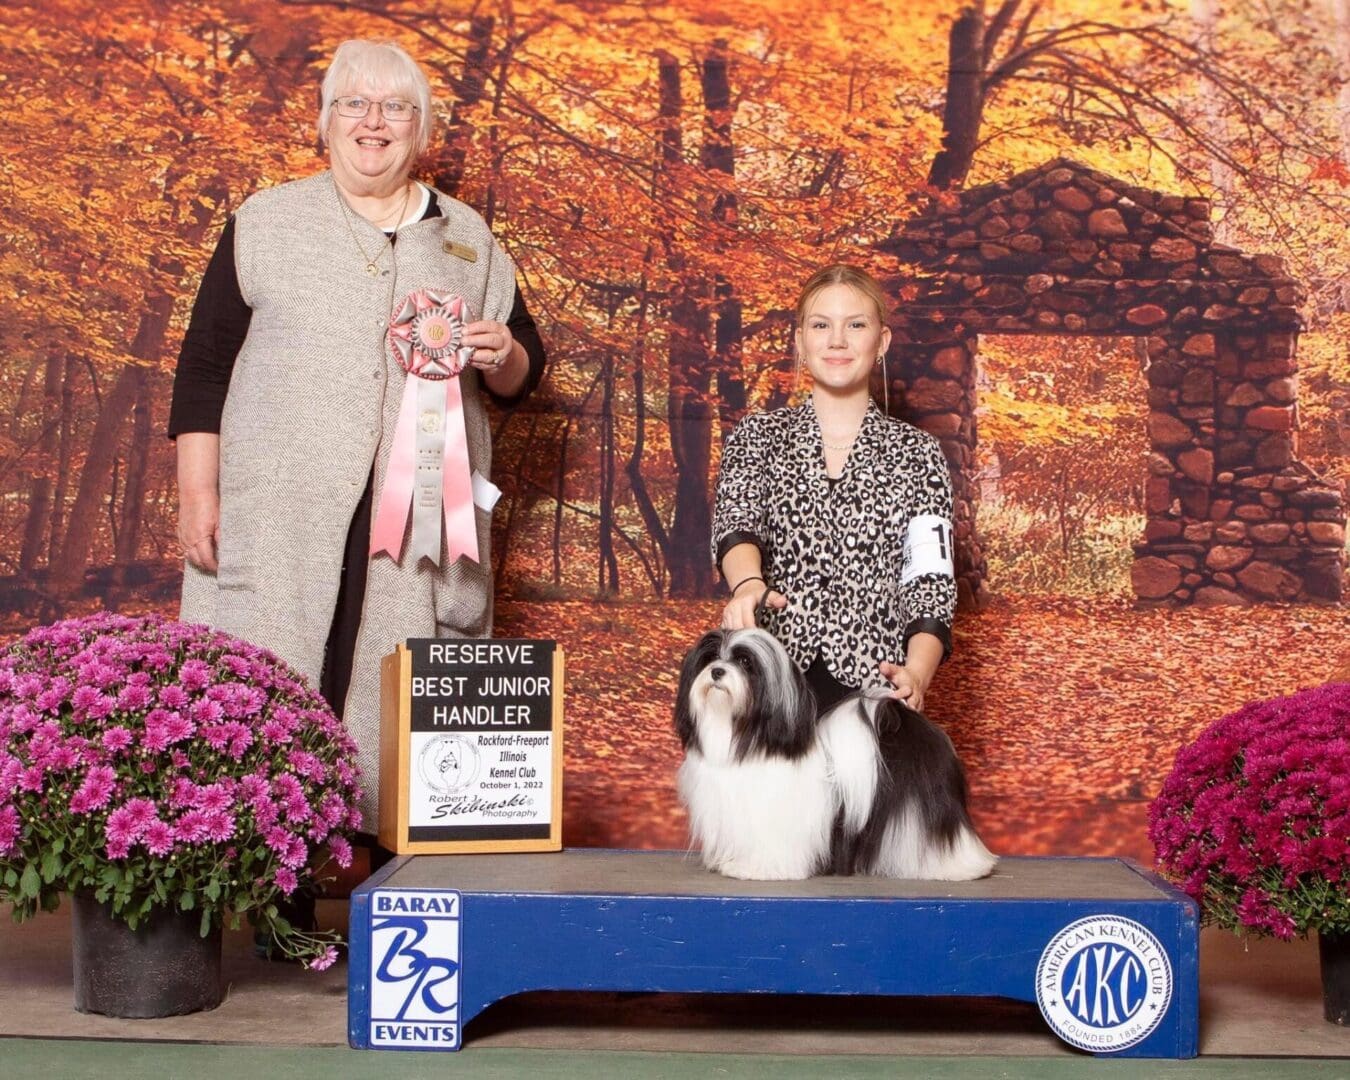 A woman and a dog standing next to each other at a dog show featuring Havanese puppies.